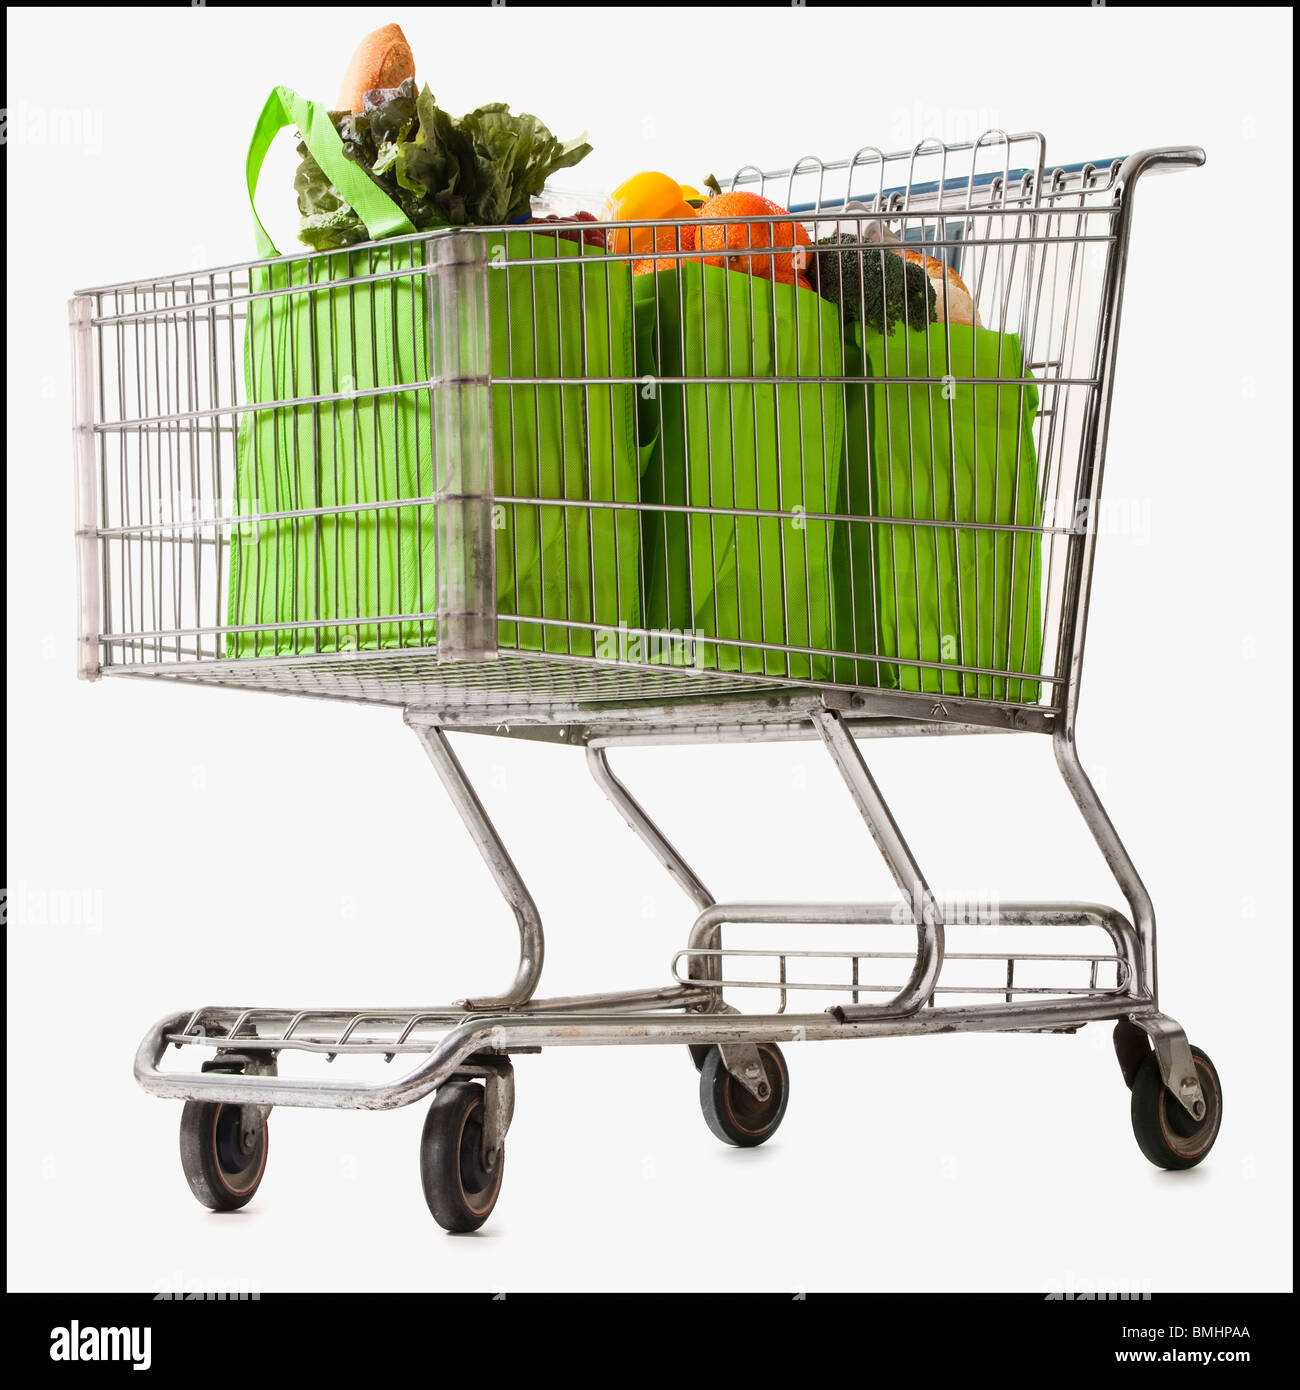 Grocery cart full of bagged produce Stock Photo